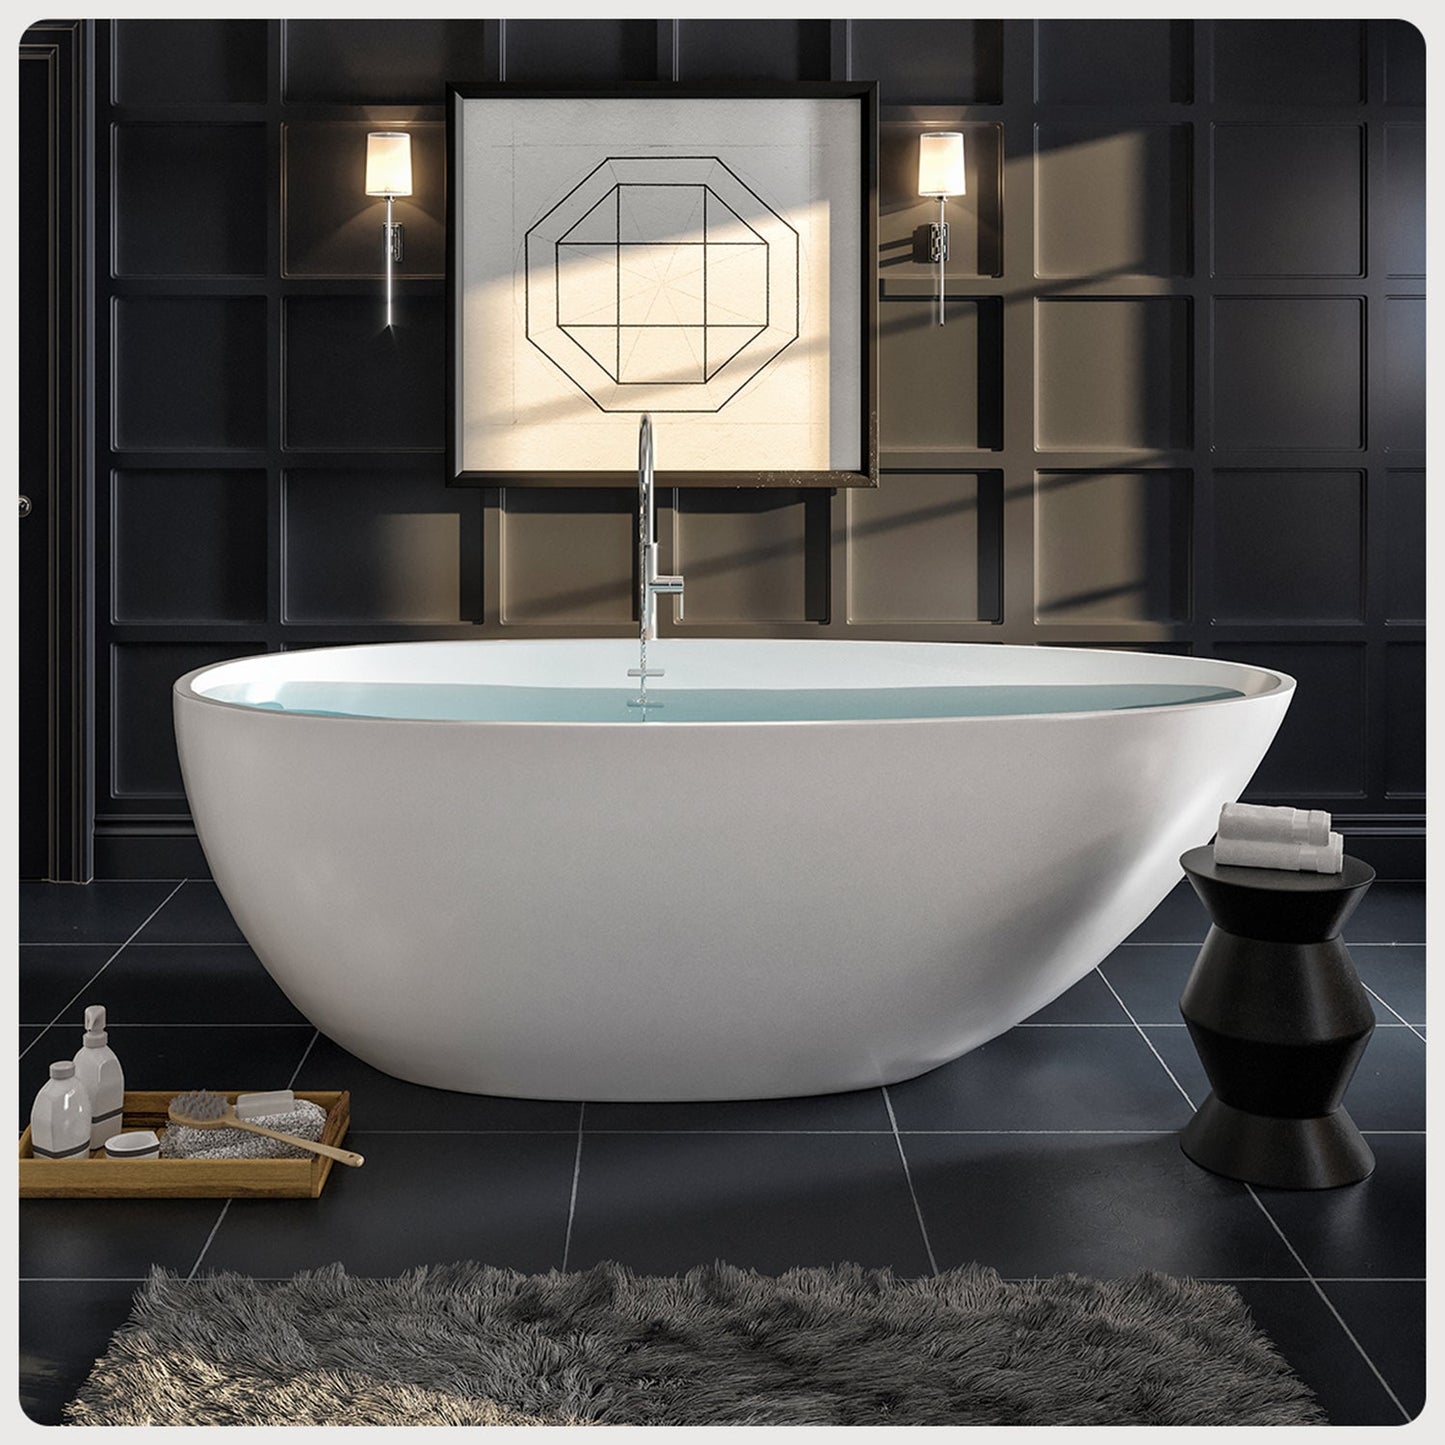 Eviva Bliss 60 Inch Solid Surface Freestanding Bathtub in Matte White